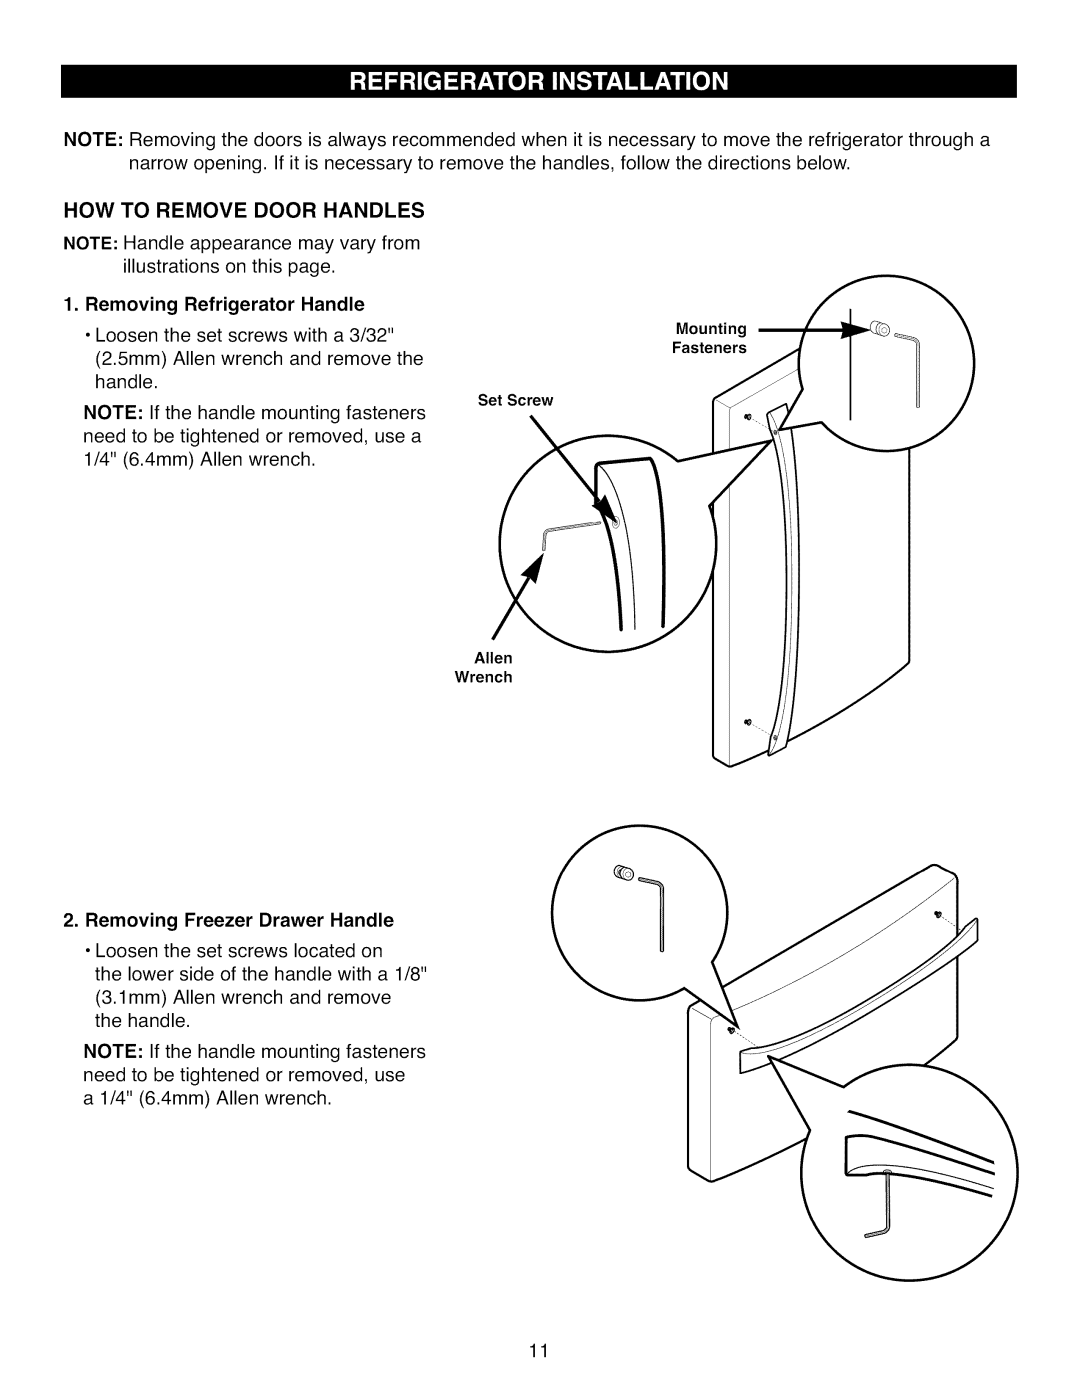 Kenmore 795.7104 manual How To Remove Door Handles, Removing Refrigerator Handle, Removing Freezer Drawer Handle 